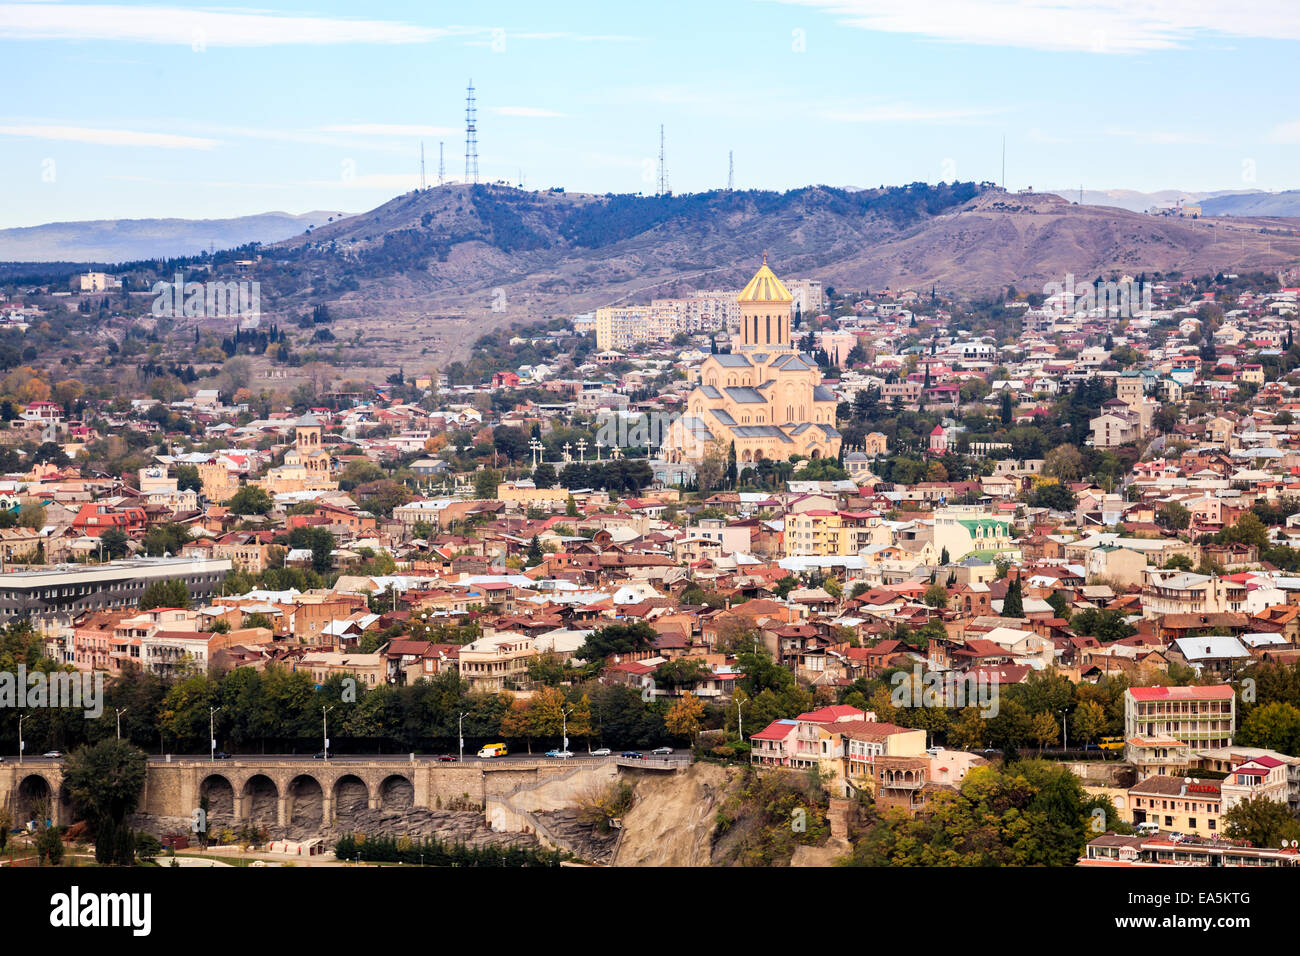 Aerial view of Tbilisi, the capital city of Georgia Stock Photo